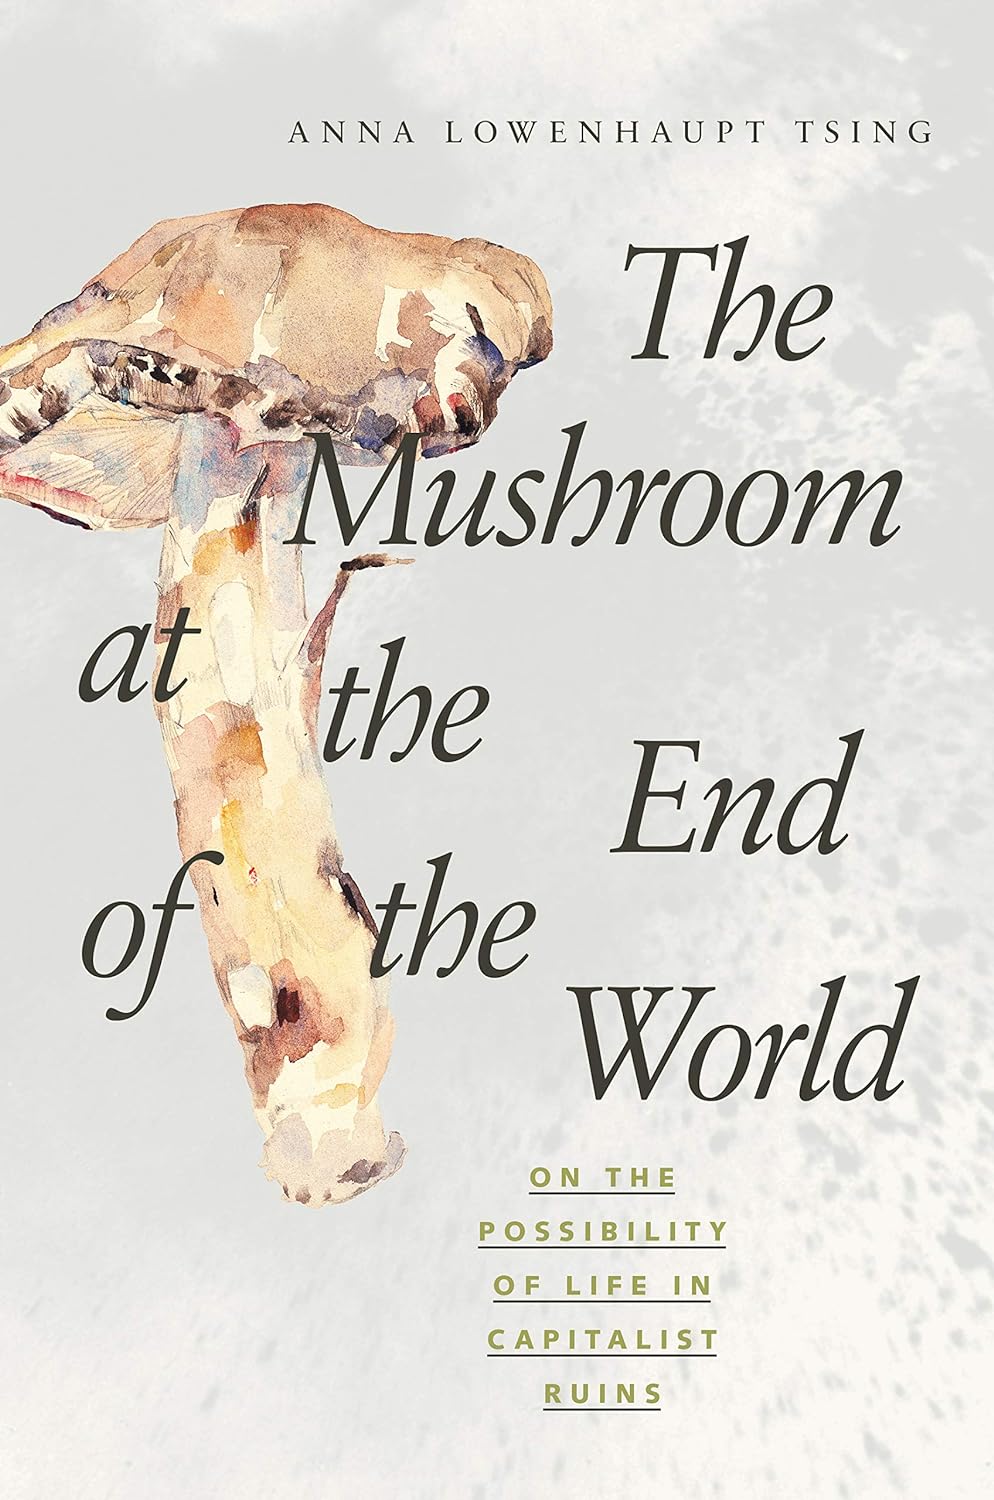 Anna Lowenhaupt Tsing: The Mushroom at the End of the World (2015)